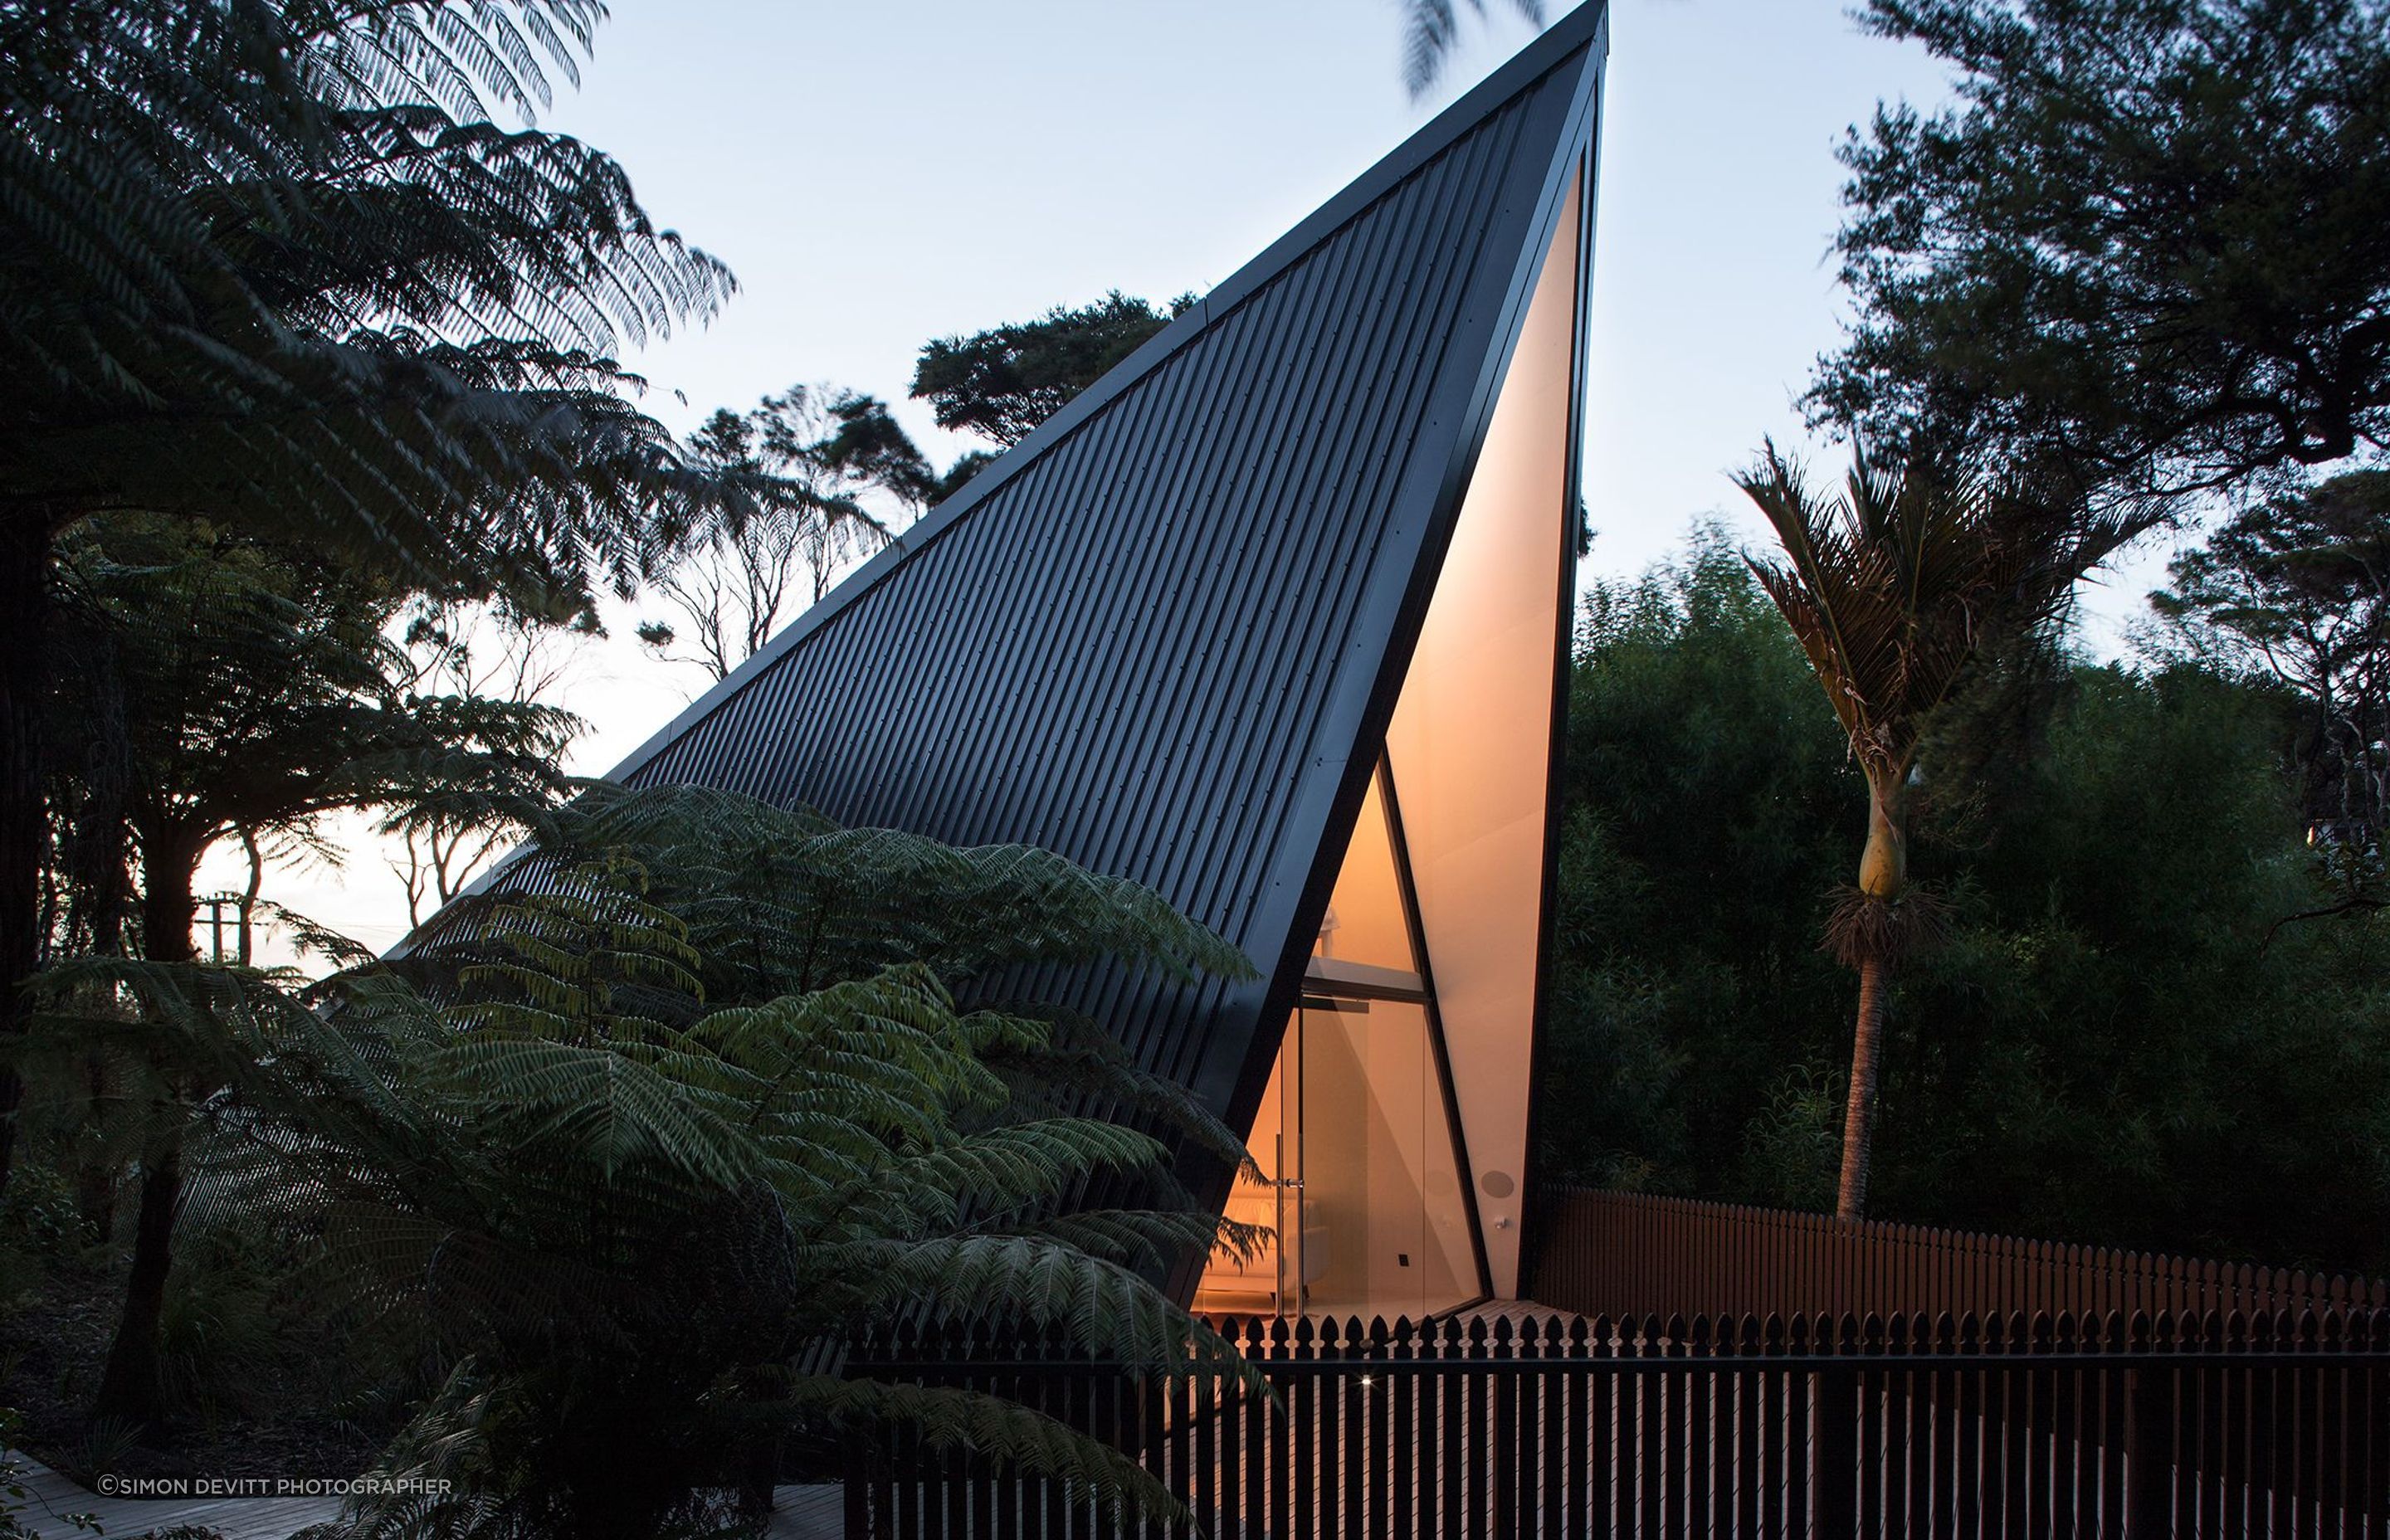 Chris Tate's Tent House on Waiheke Island utilises Colorsteel to clad both the roof and walls of this unusual A-frame structure.